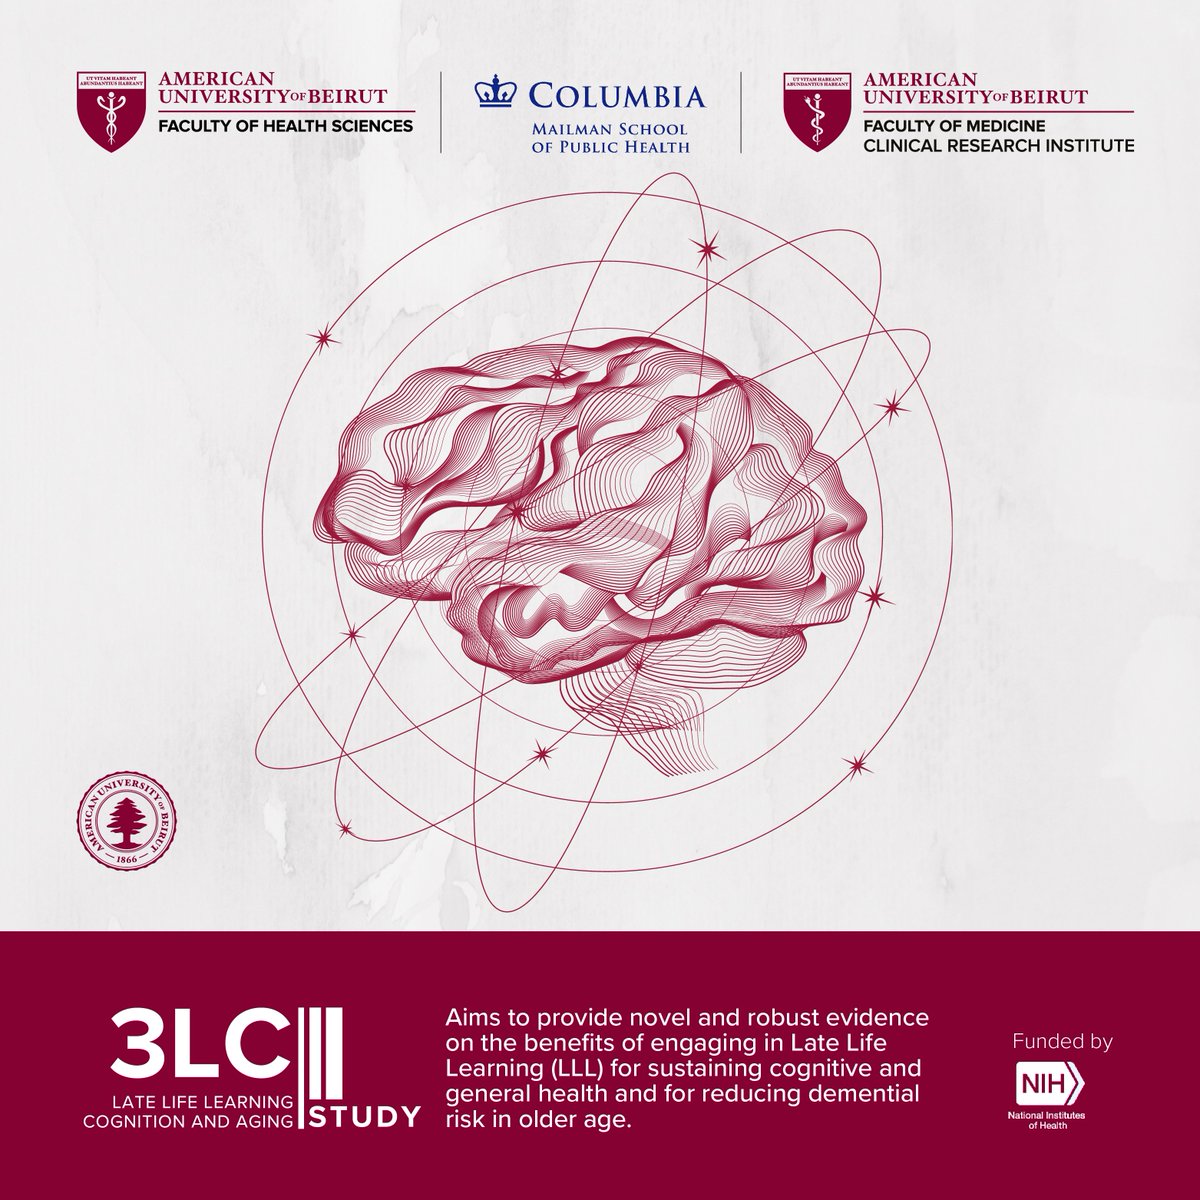 With a team of researchers from @fhs_aub, @CRI_AUBMC & @columbia, the @3LCStudy_AUB is exploring the benefits of Late Life Learning on cognitive health & dementia risk reduction in older adults. Stay tuned! @martinebejjani  @abla_sibai @AdinaHazzouri @hana__orabi @Larachehabedine